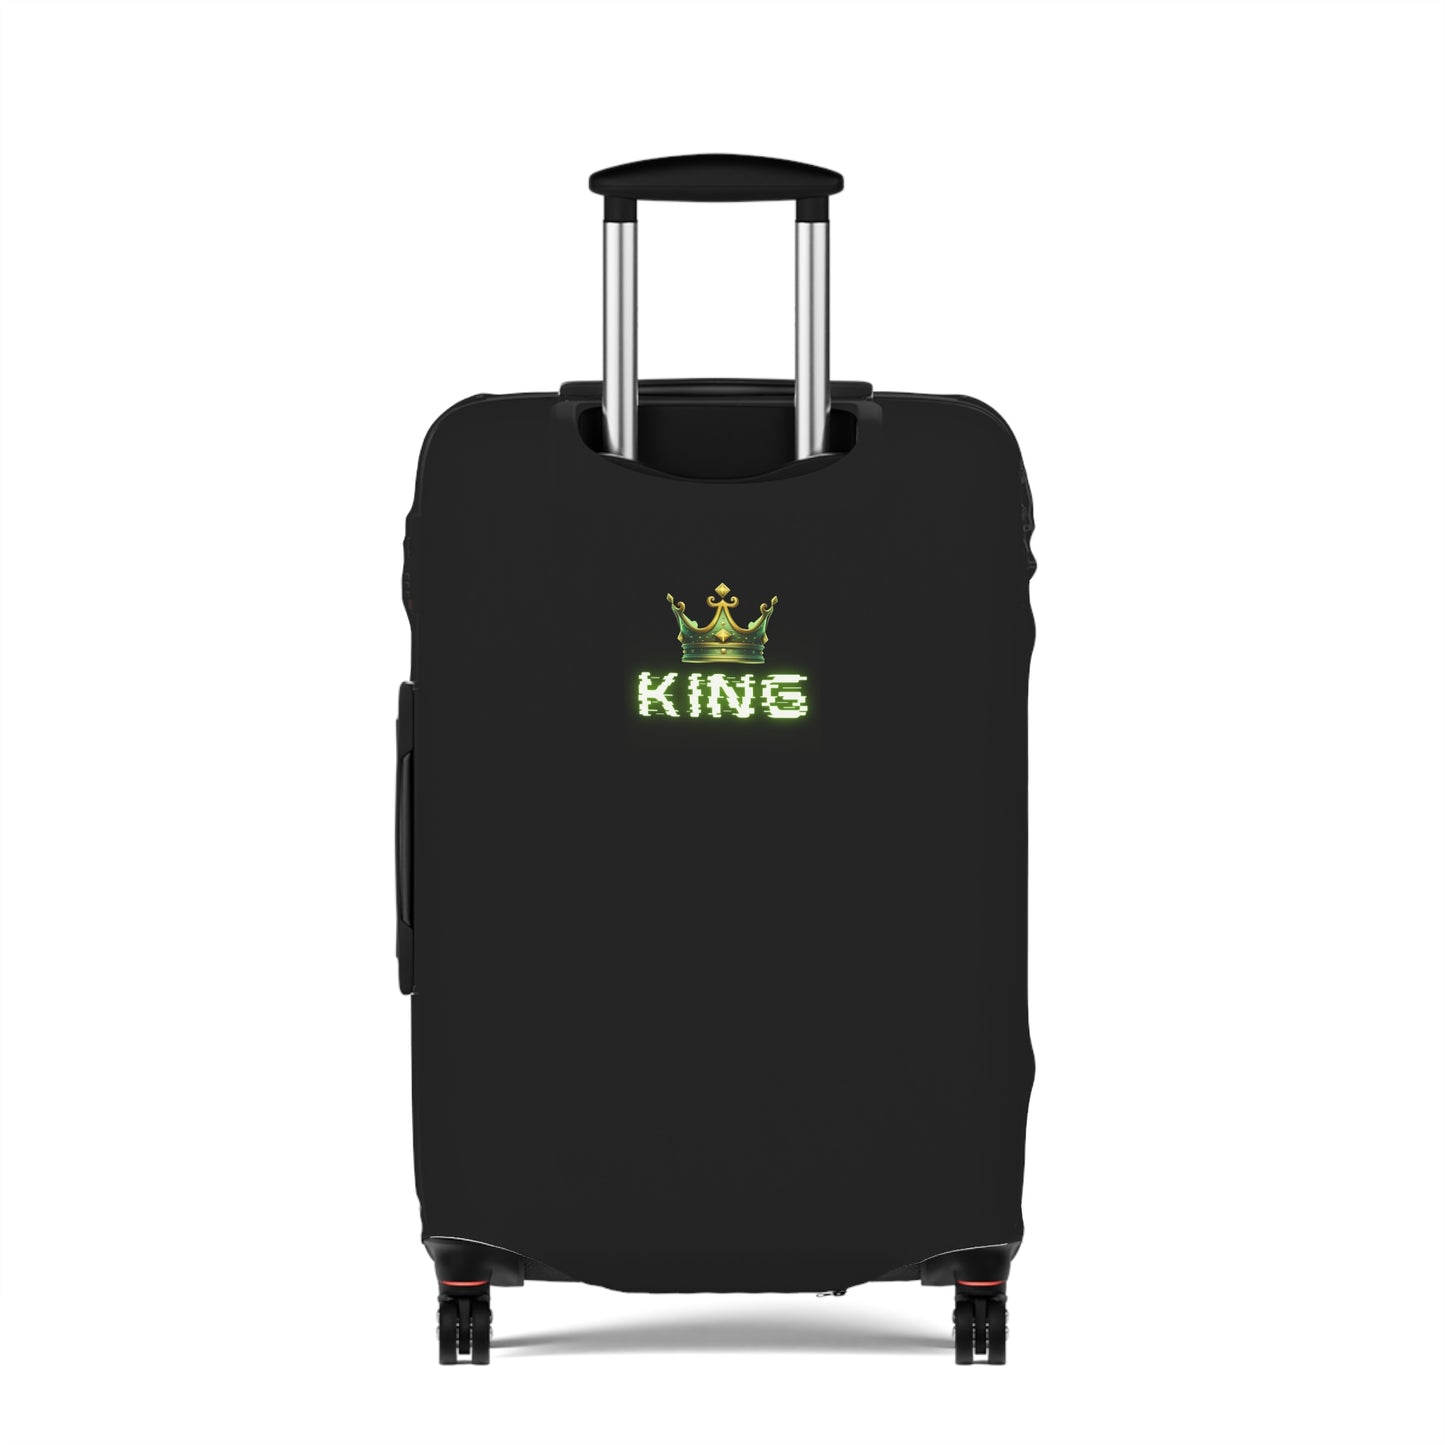 King Luggage Cover From BFT By Schatar